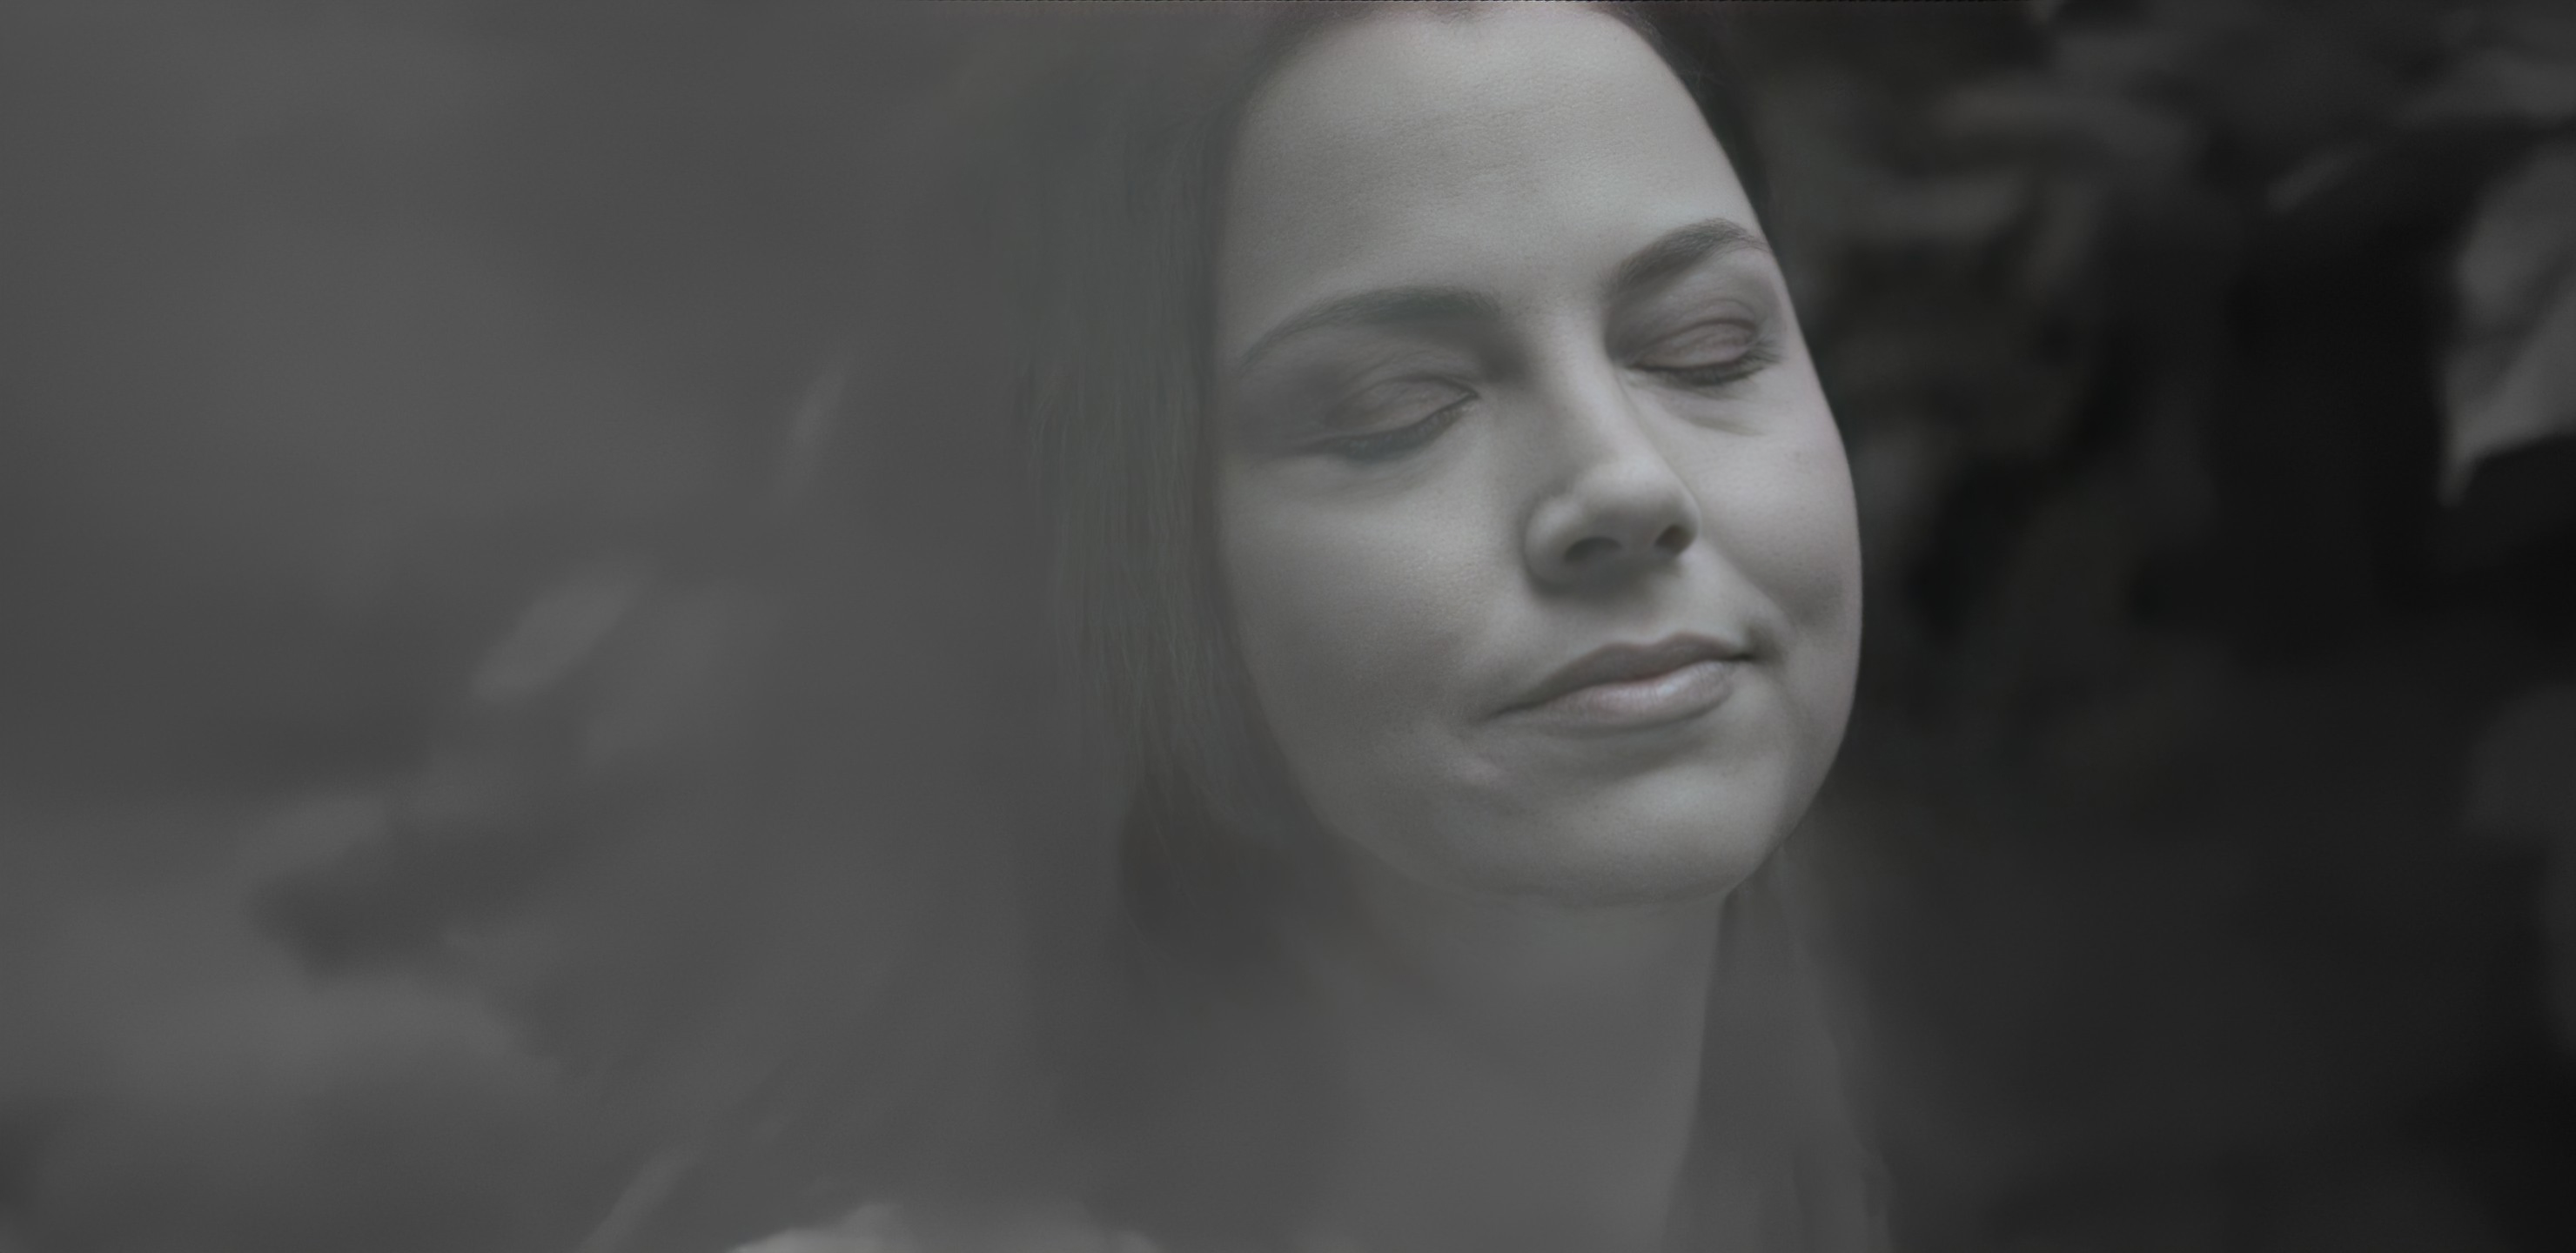 2960x1440
Keywords: amy lee;going to california;video;recover